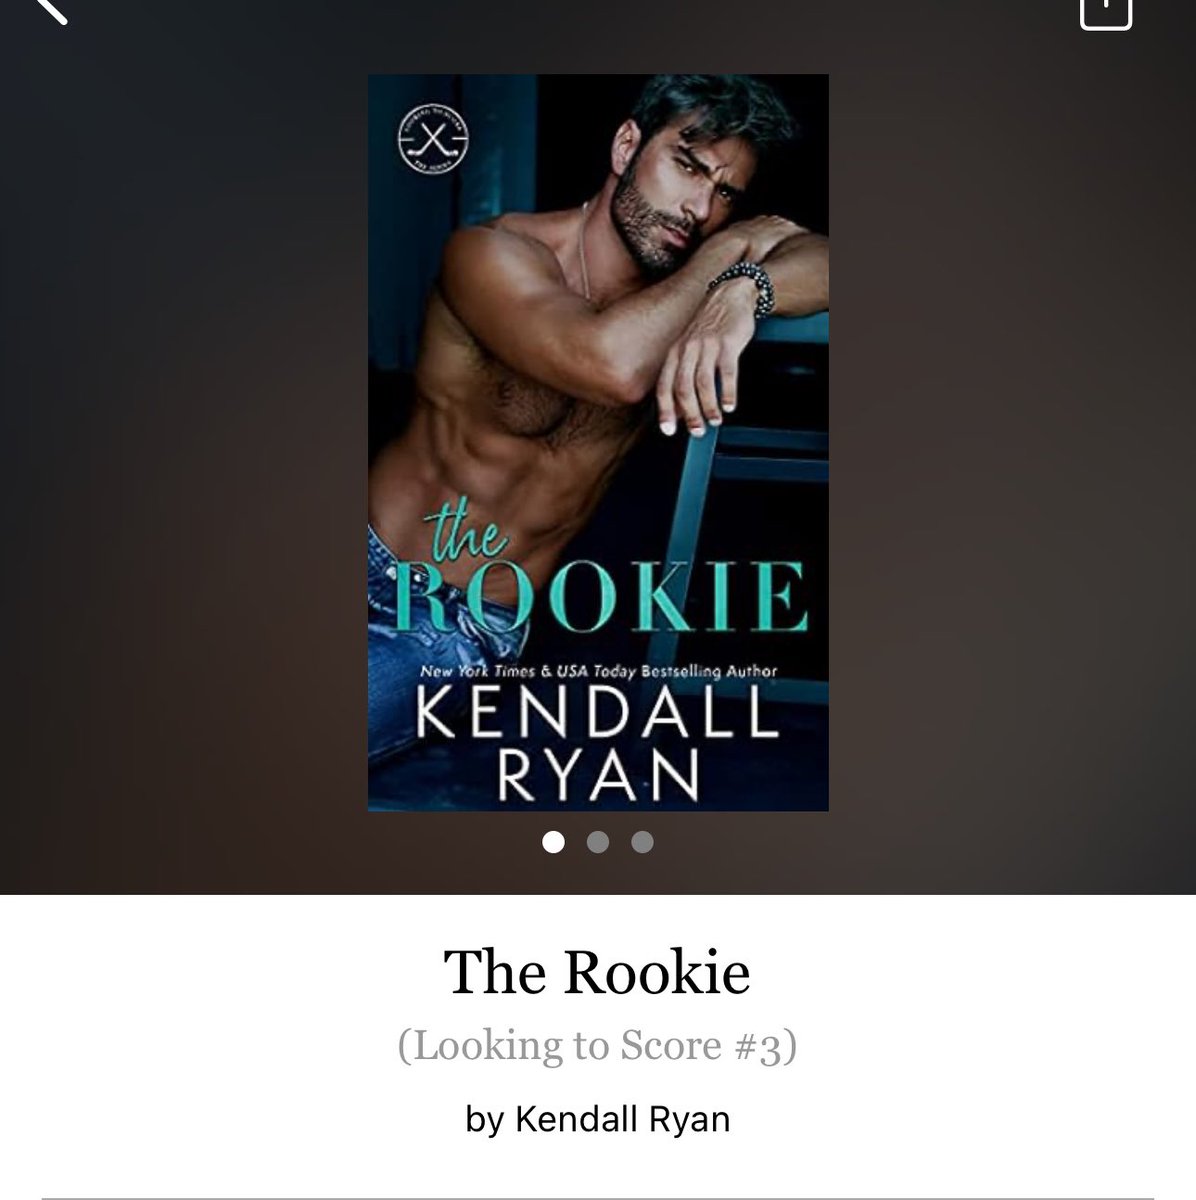 The Rookie by Kendall Ryan 

#TheRookie by #KendallRyan #6287 #25chapters #306pages #436of400 #Series #audiobook #73for19 #Book3of4 #LookingToScoreSeries #7houraudiobook #Hoopla #april2024 #clearingoffreadingshelves #whatsnext #readitquick